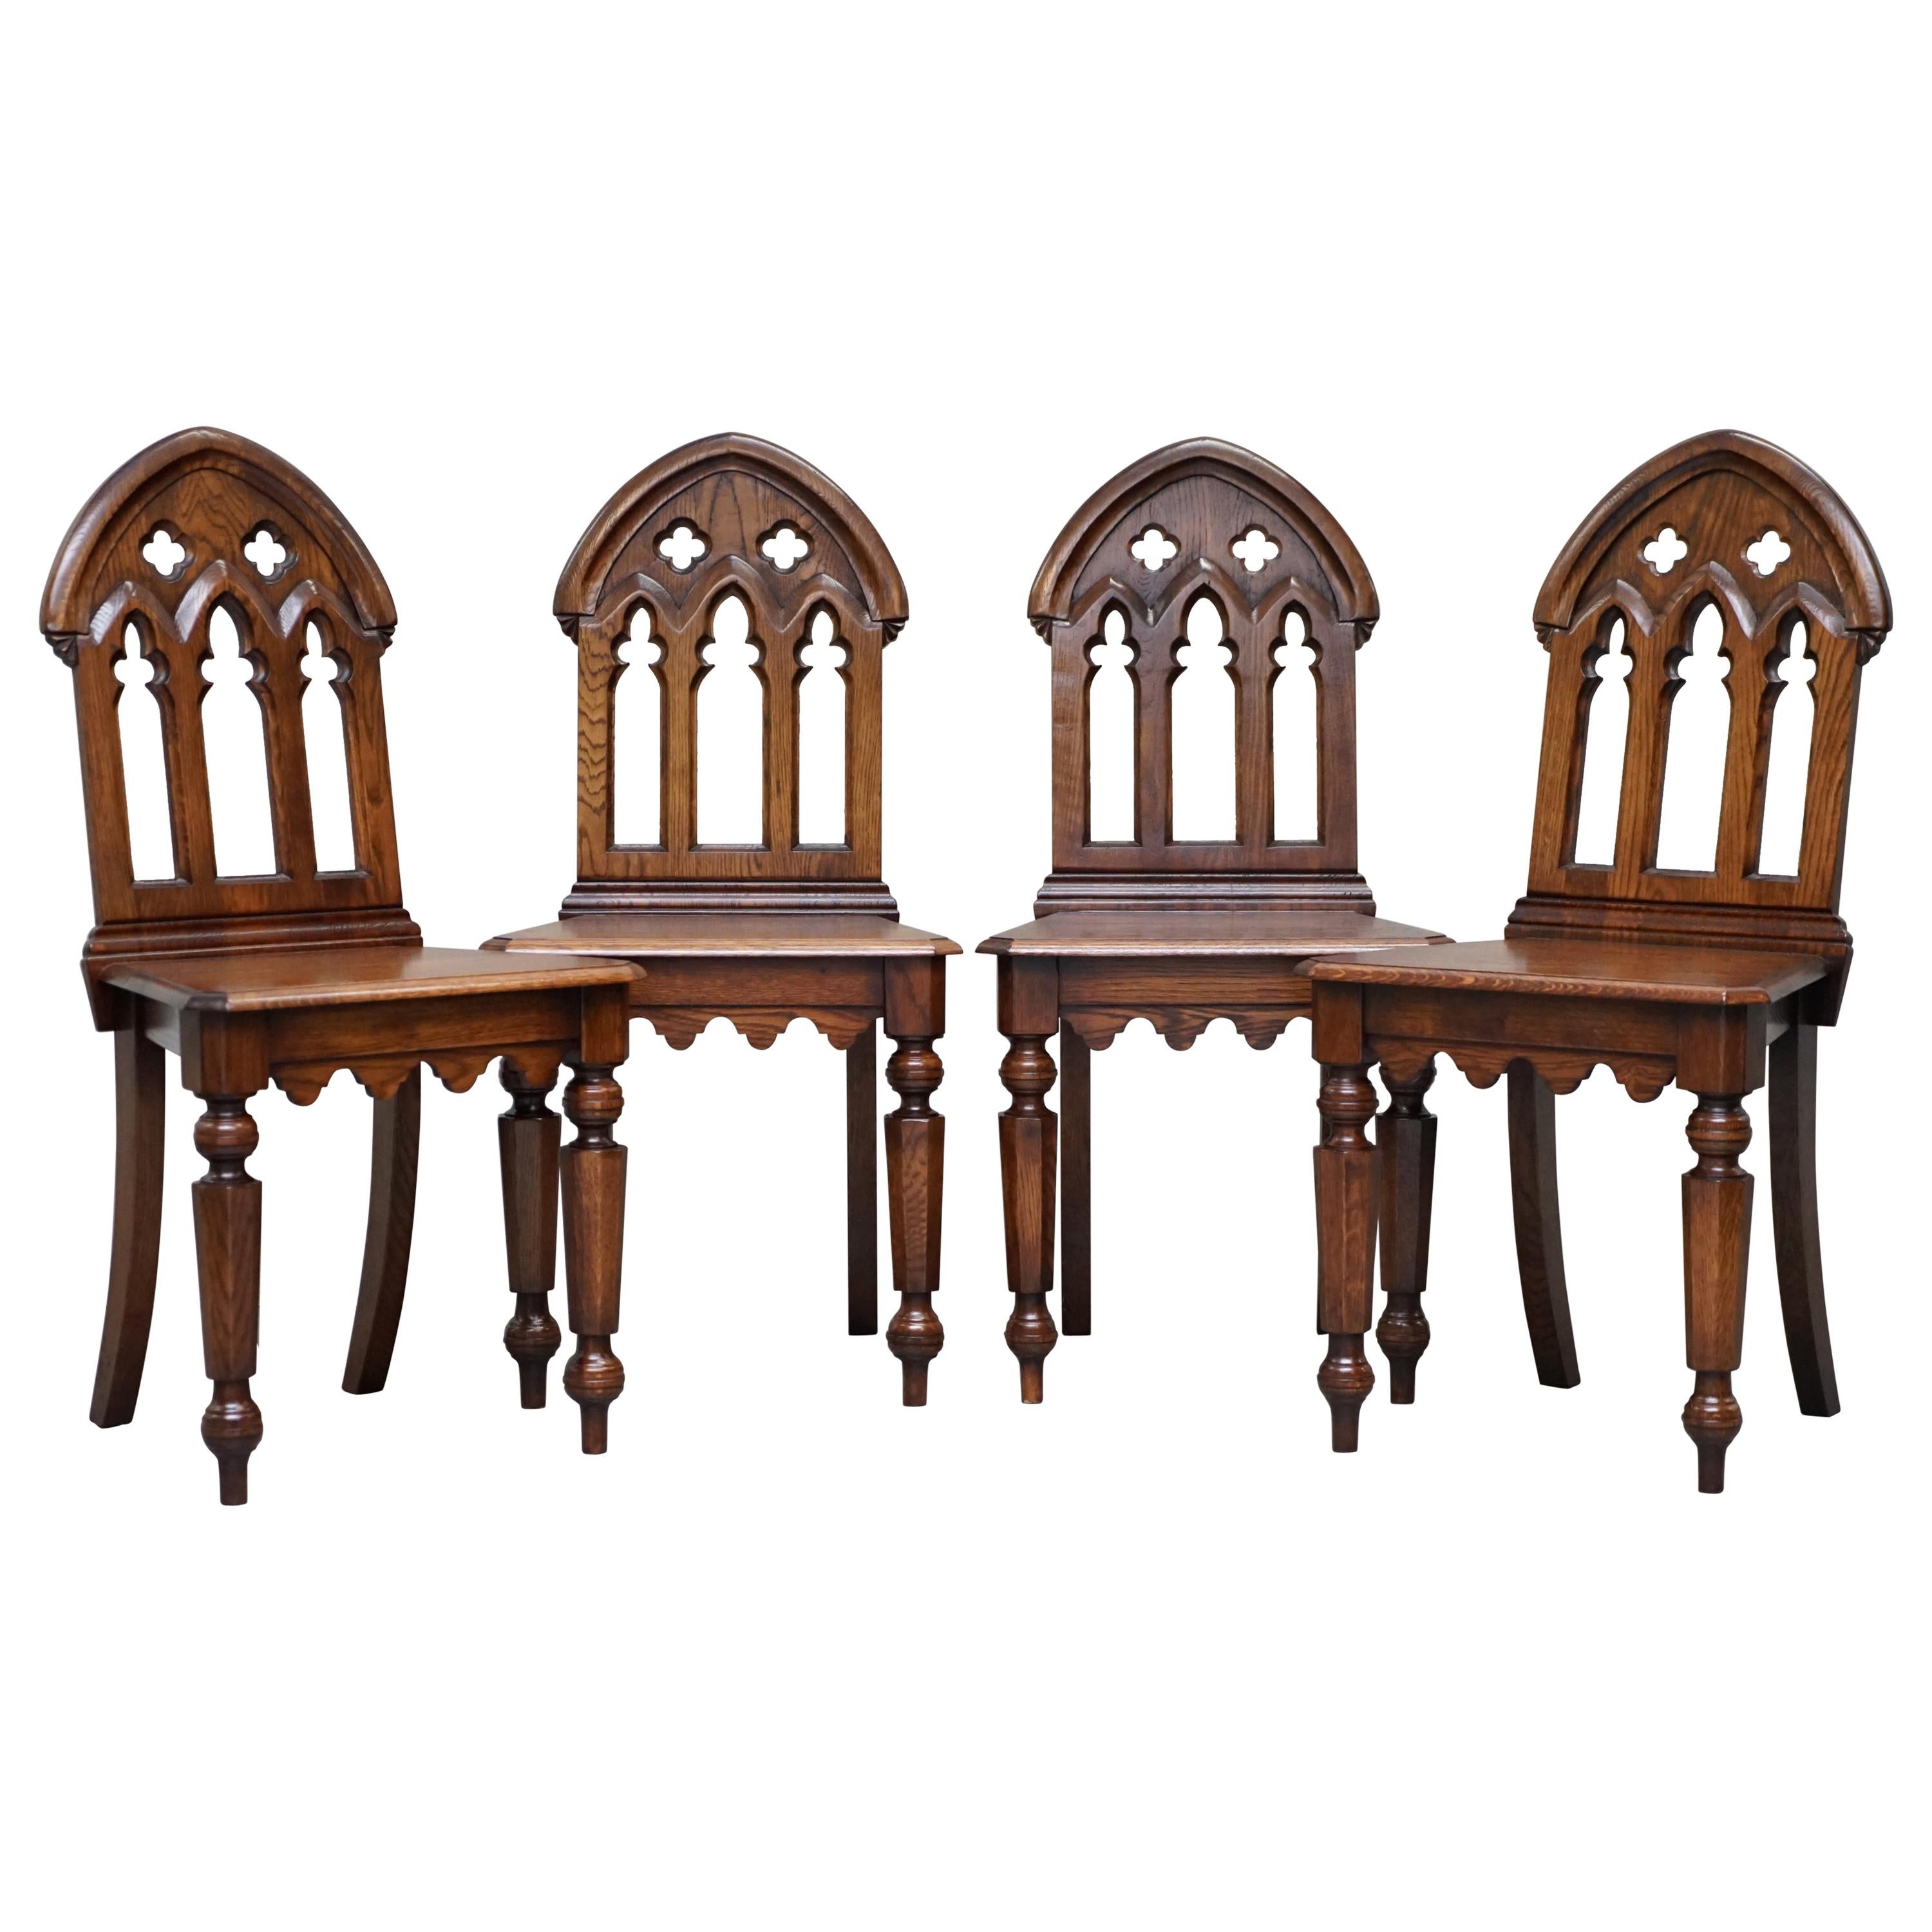 4 English Oak Gothic Steeple Back Dining Chairs Augustus Pugin Style Carving